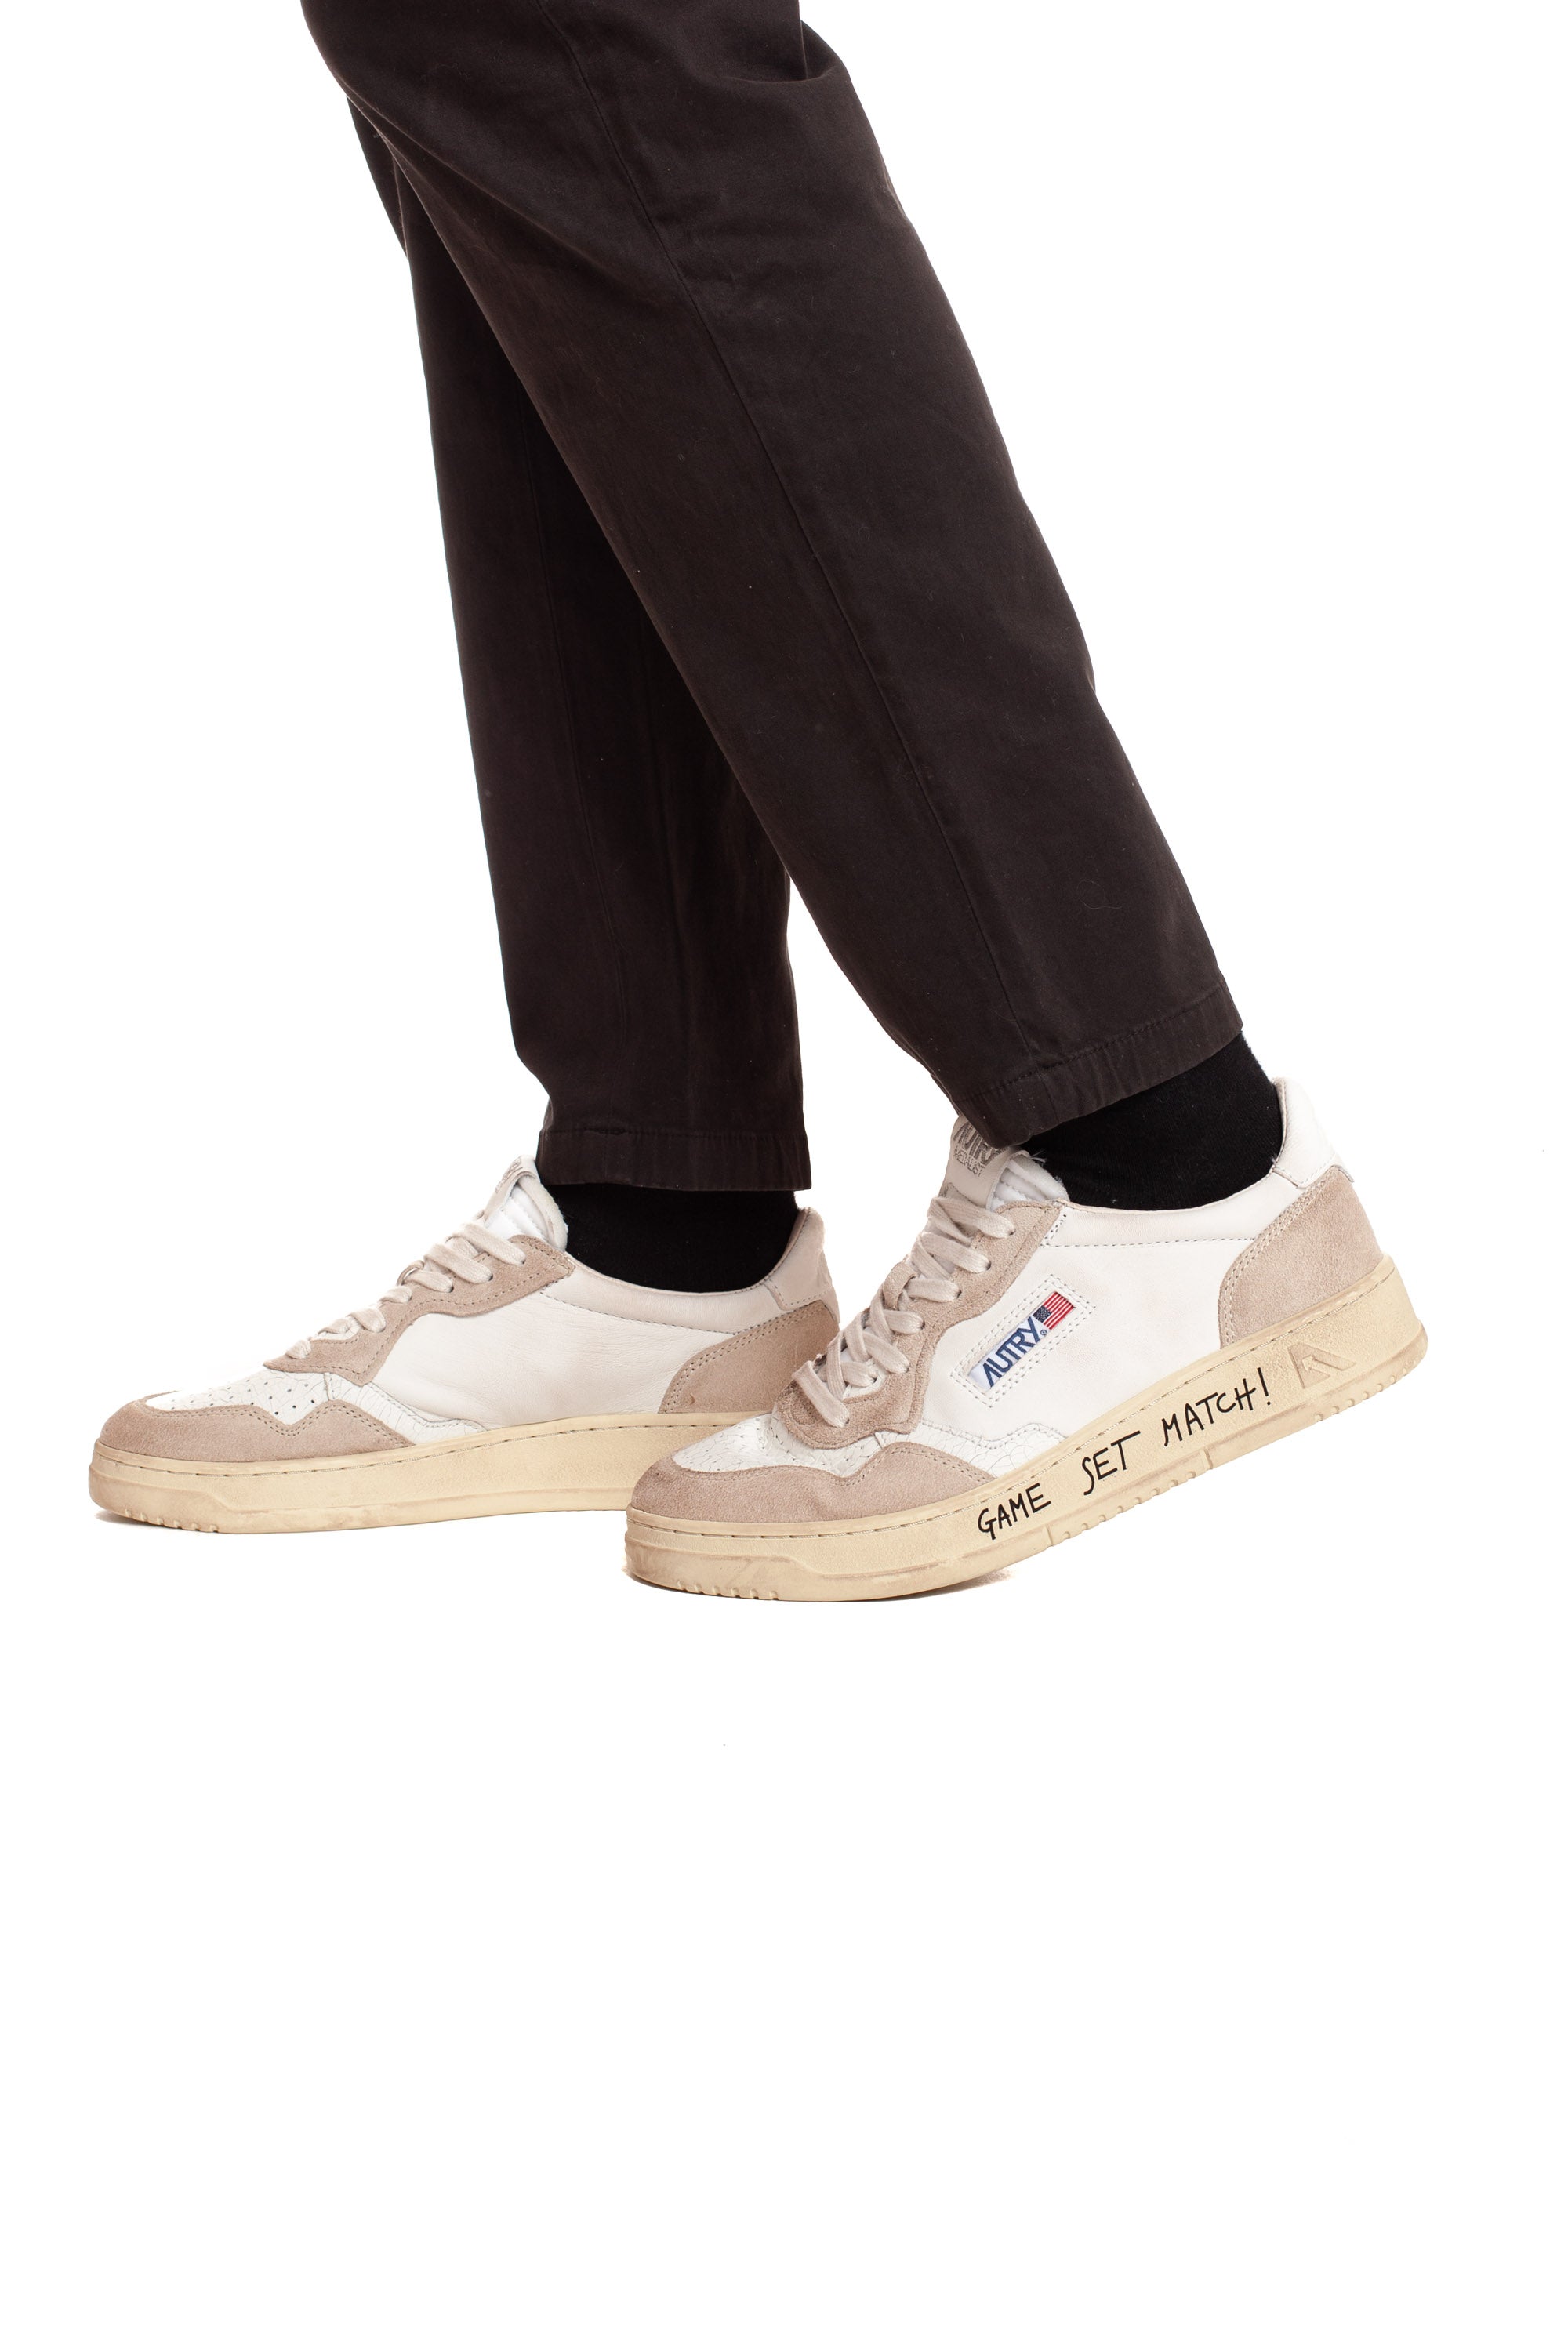 Medalist sneaker with white heel tab and writing